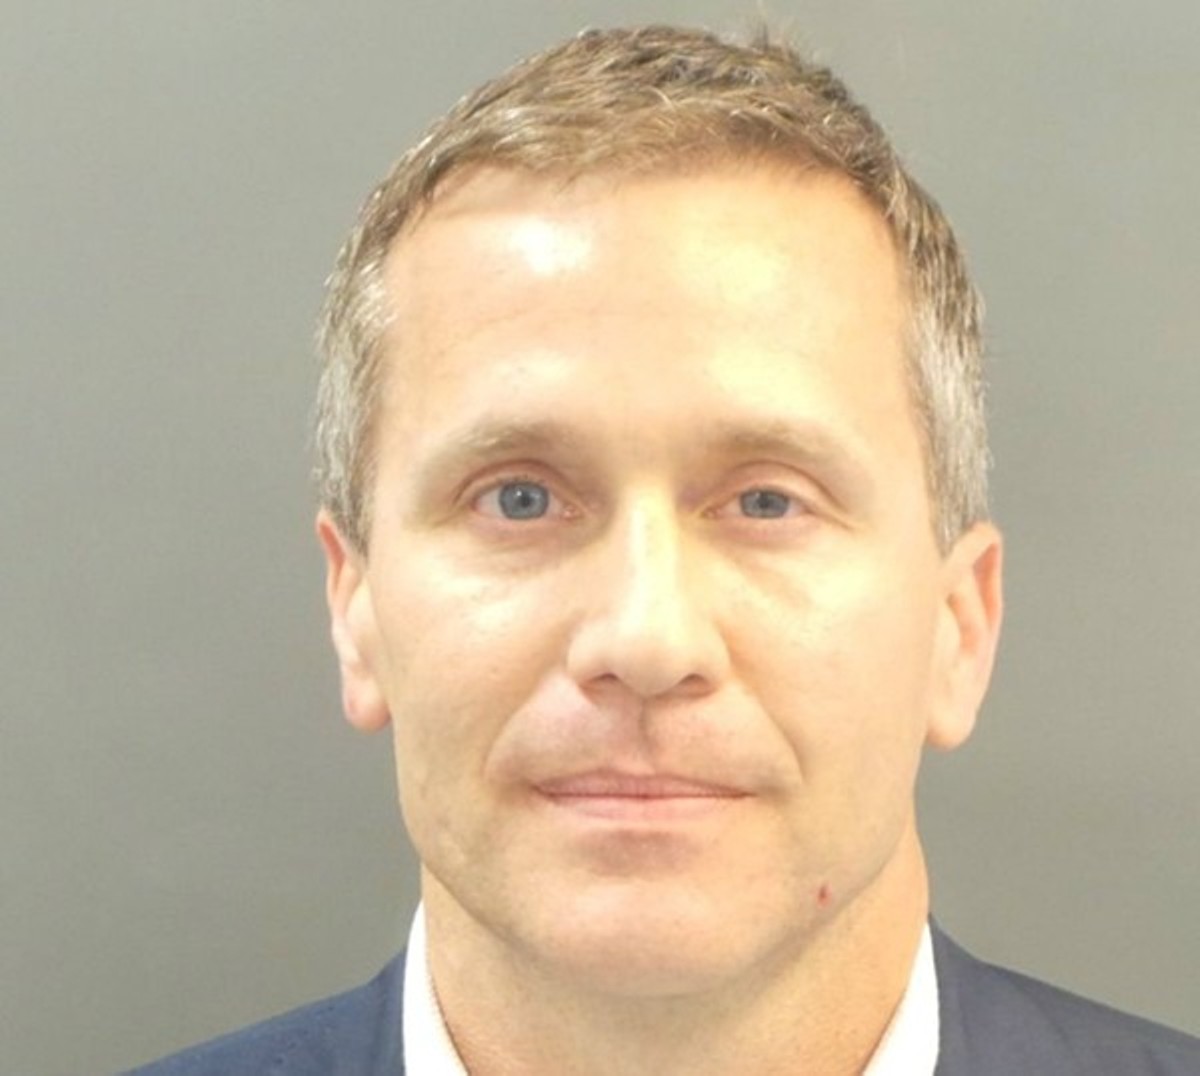 Ex-Governor Eric Greitens is out of the basement.